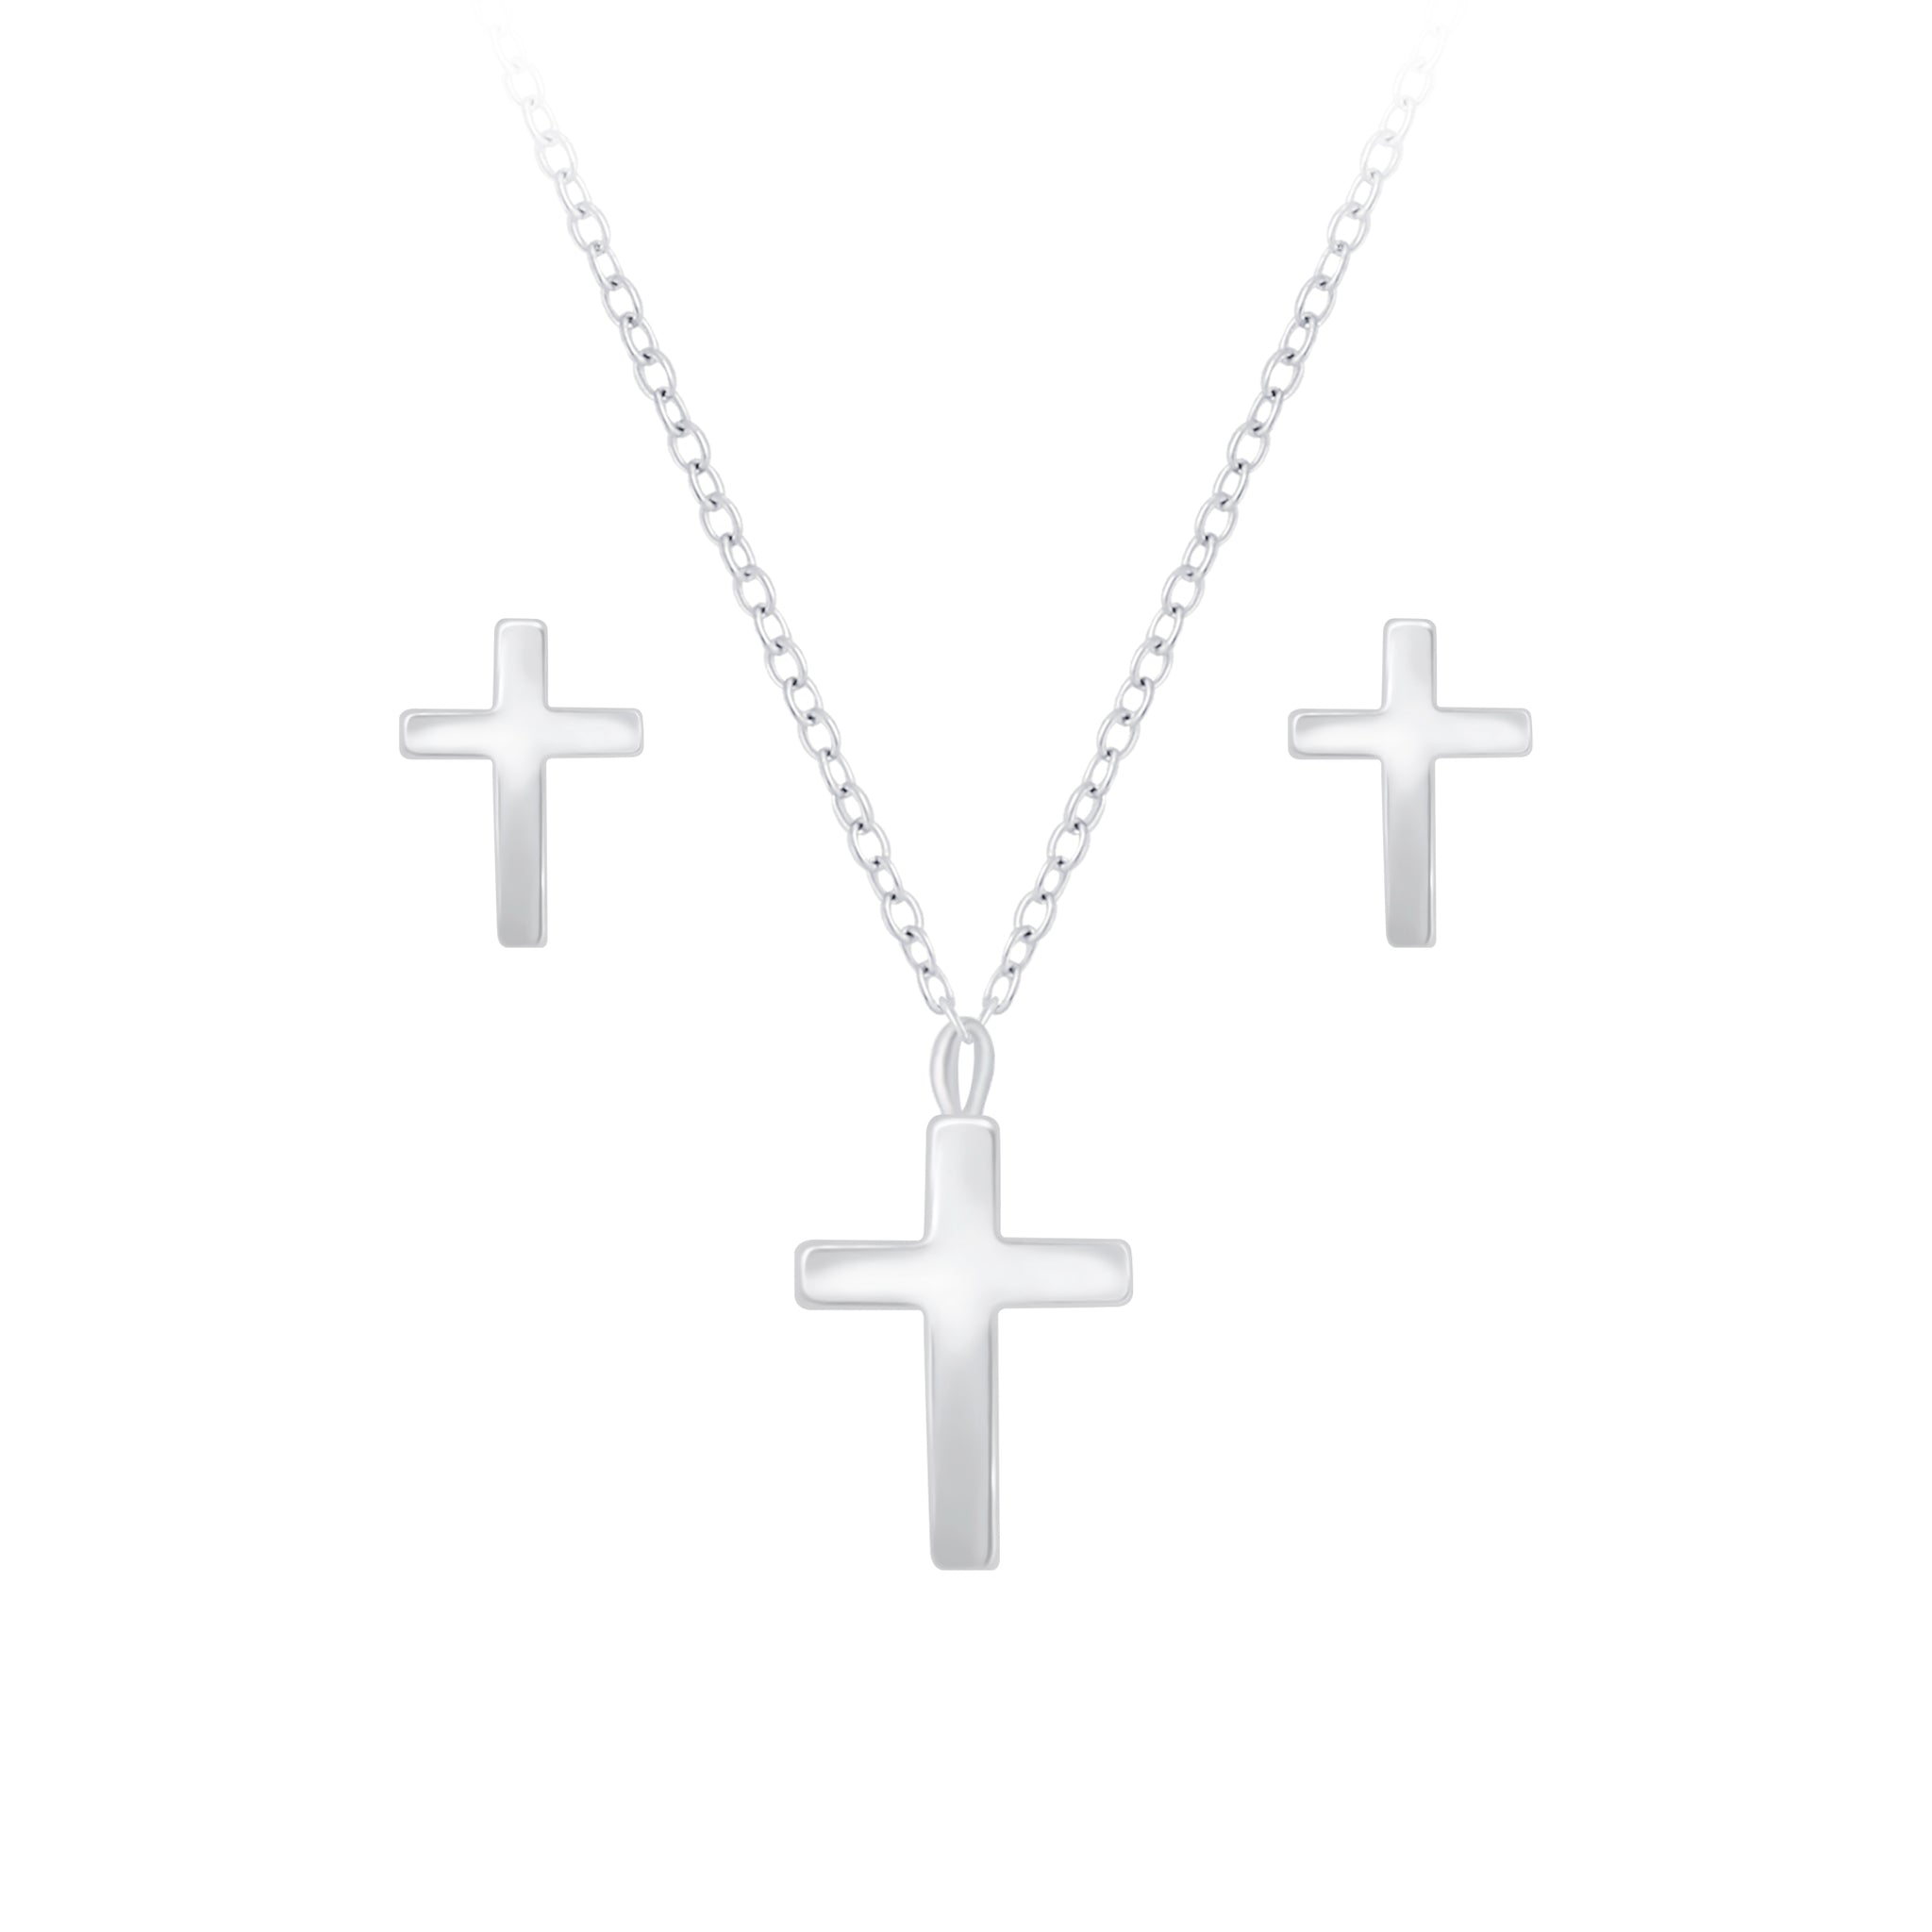 Silver Cross Necklace and Stud Earrings Set